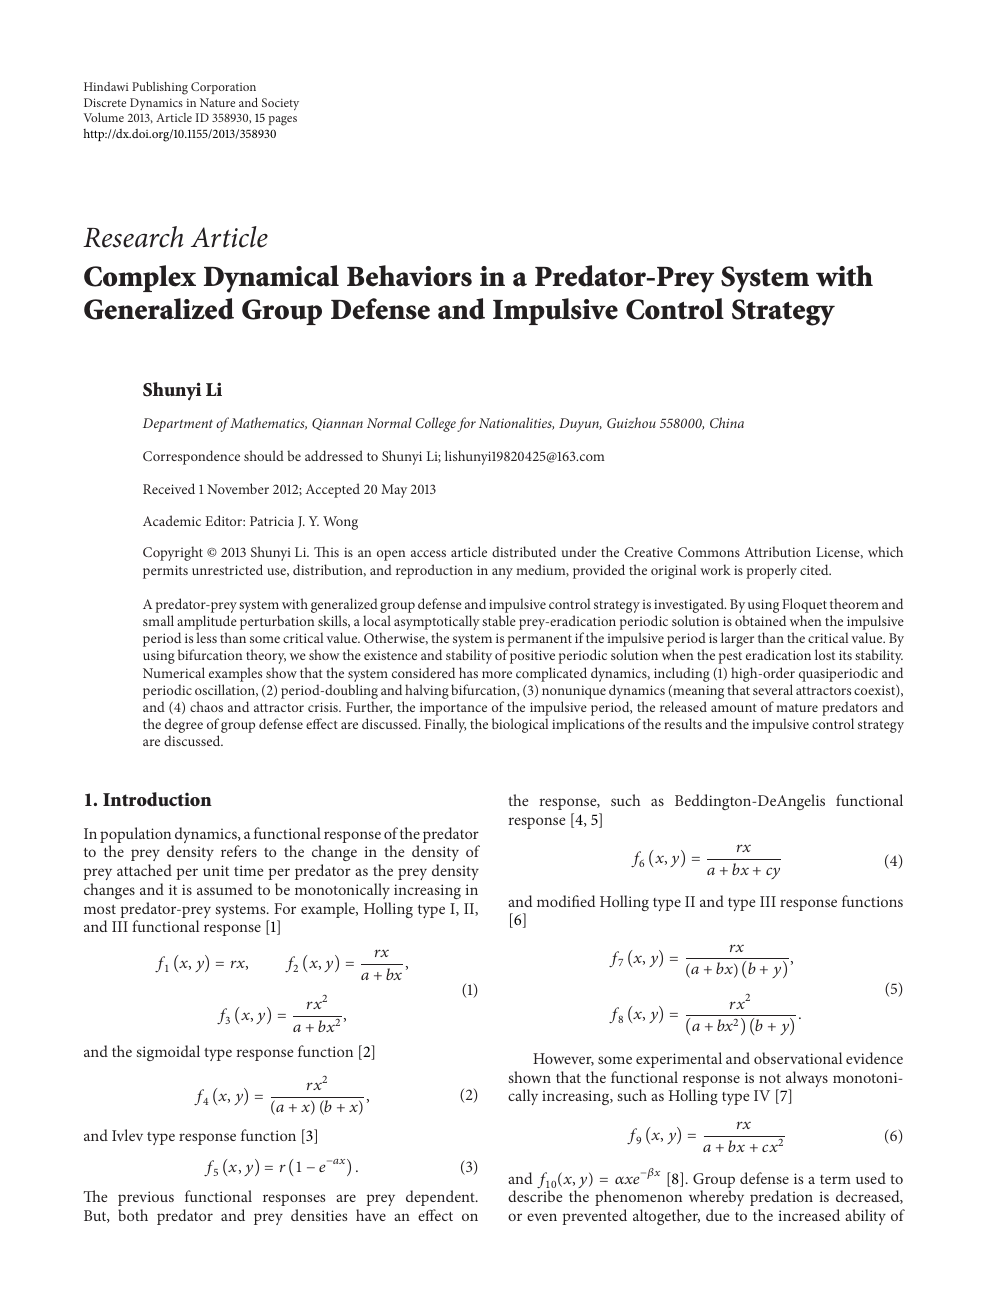 Complex Dynamical Behaviors In A Predator Prey System With Generalized Group Defense And Impulsive Control Strategy Topic Of Research Paper In Mathematics Download Scholarly Article Pdf And Read For Free On Cyberleninka